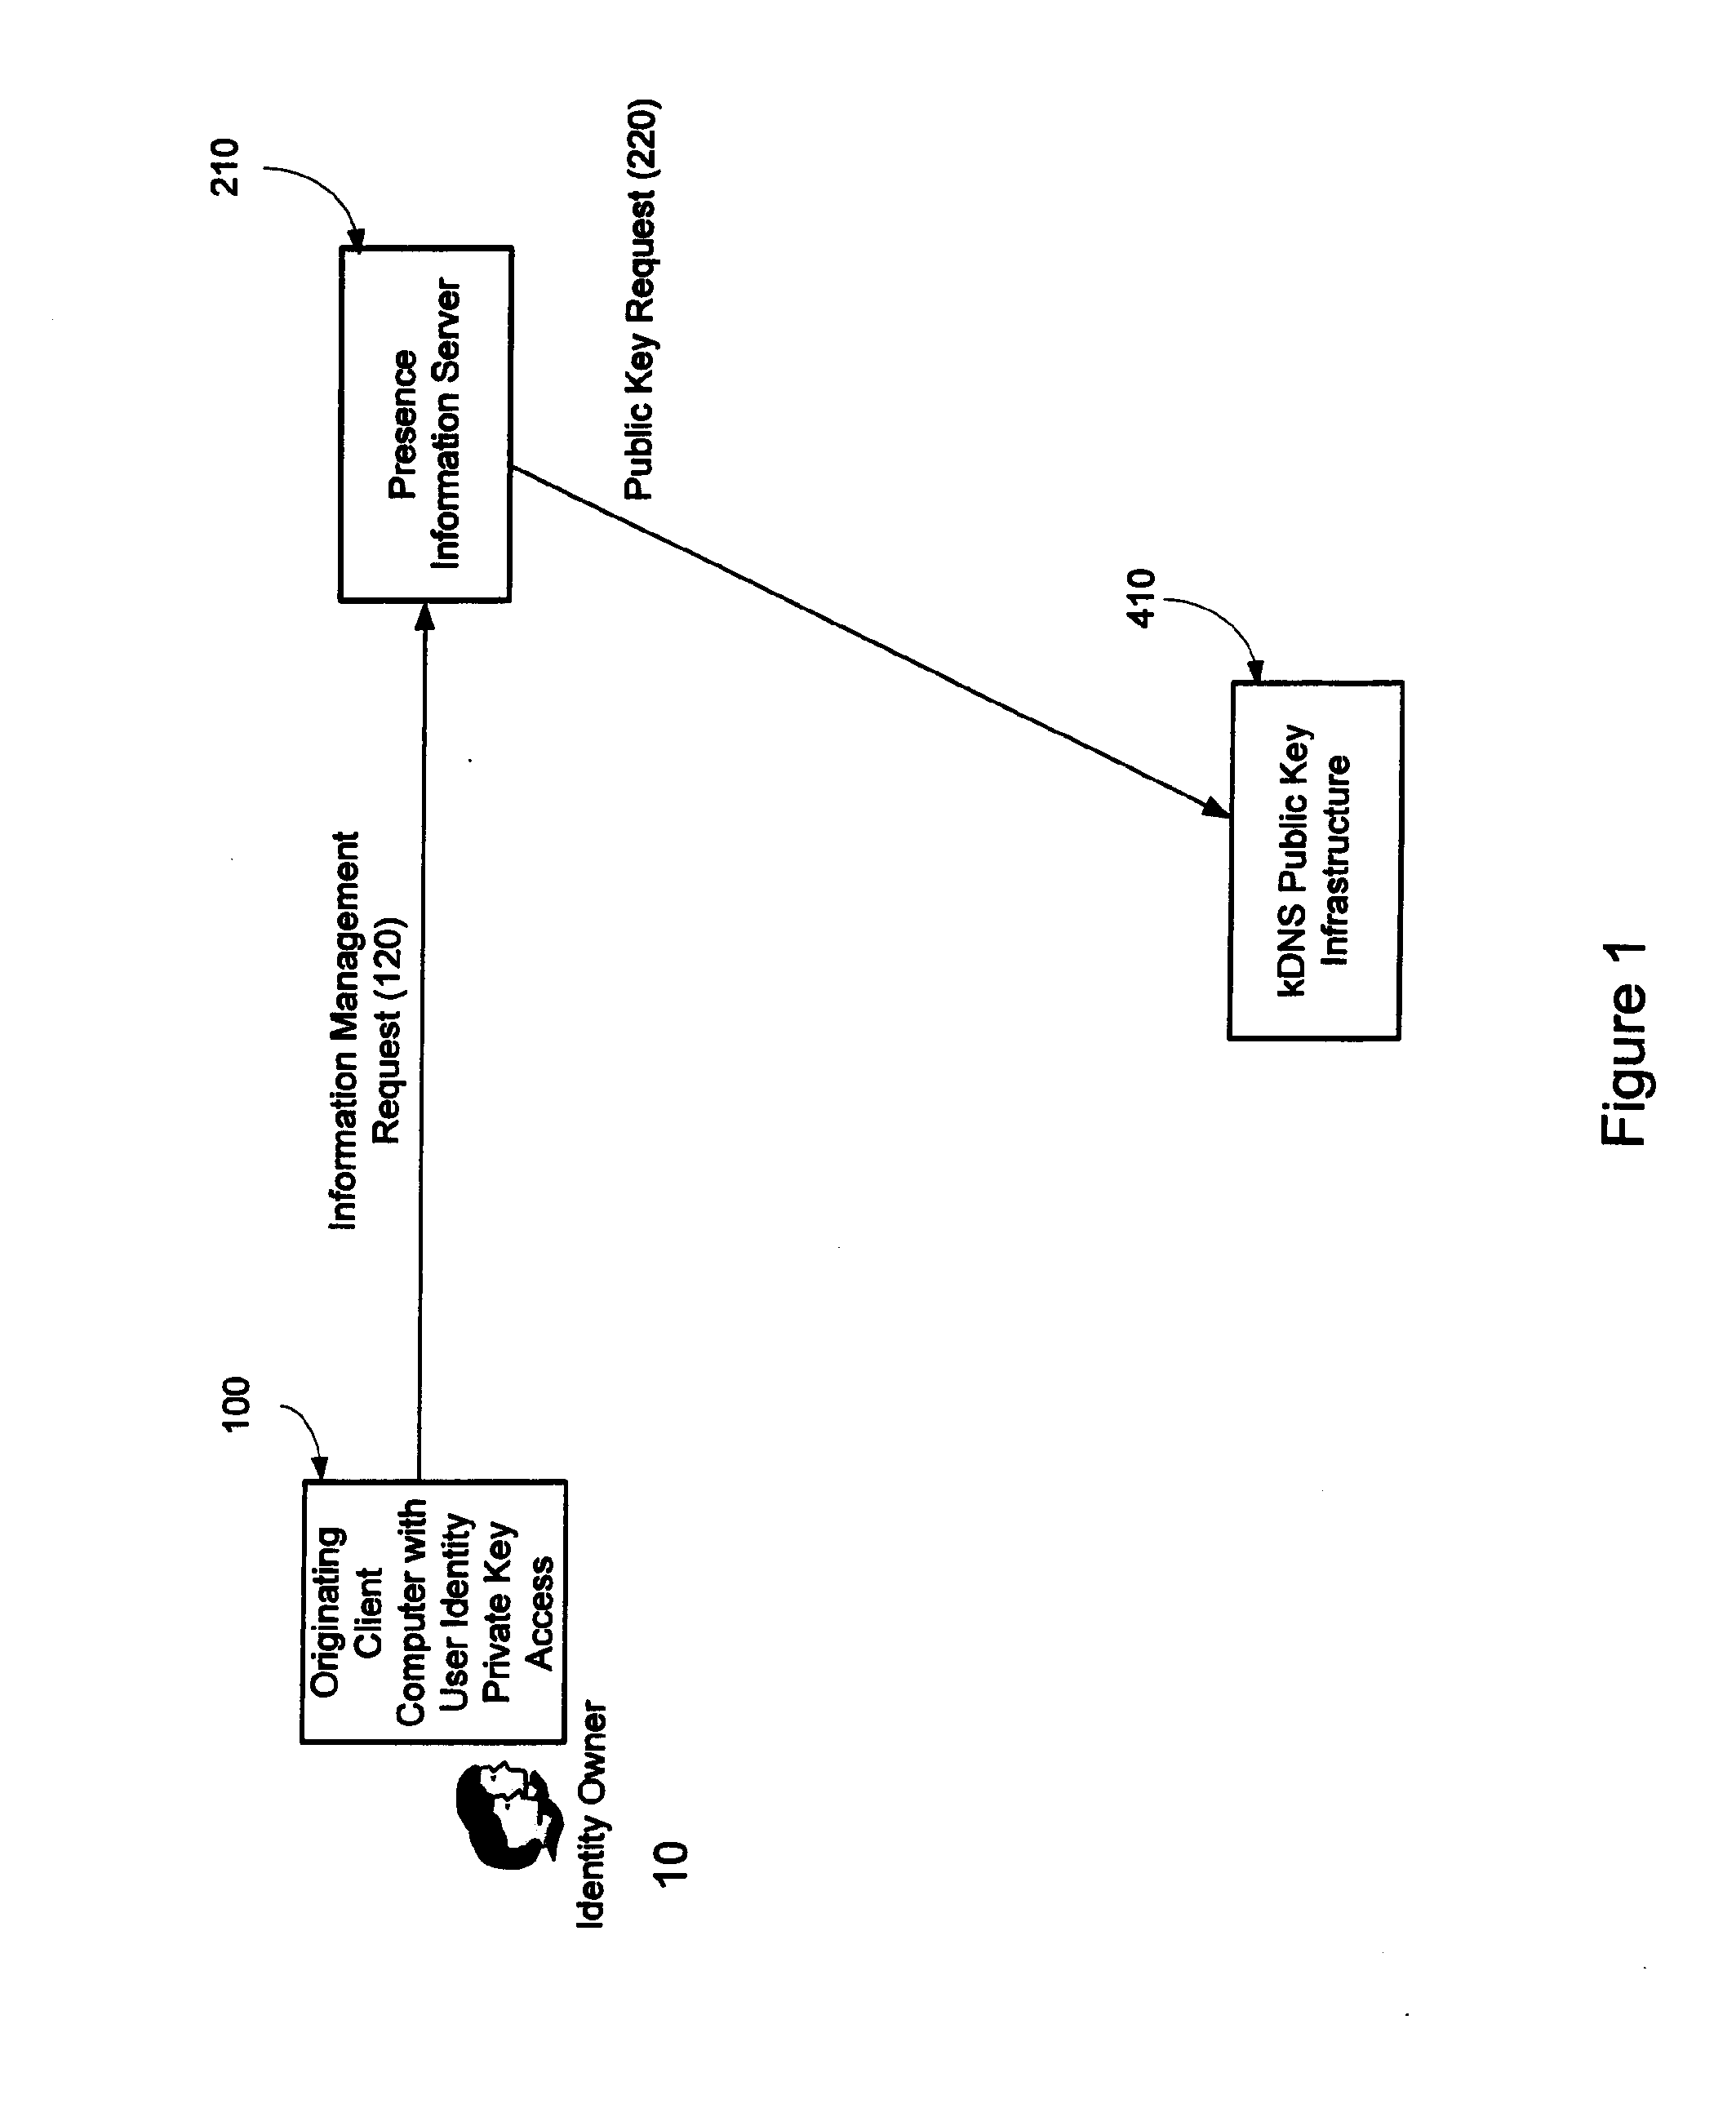 Systems and methods for secure management of presence information for communication services